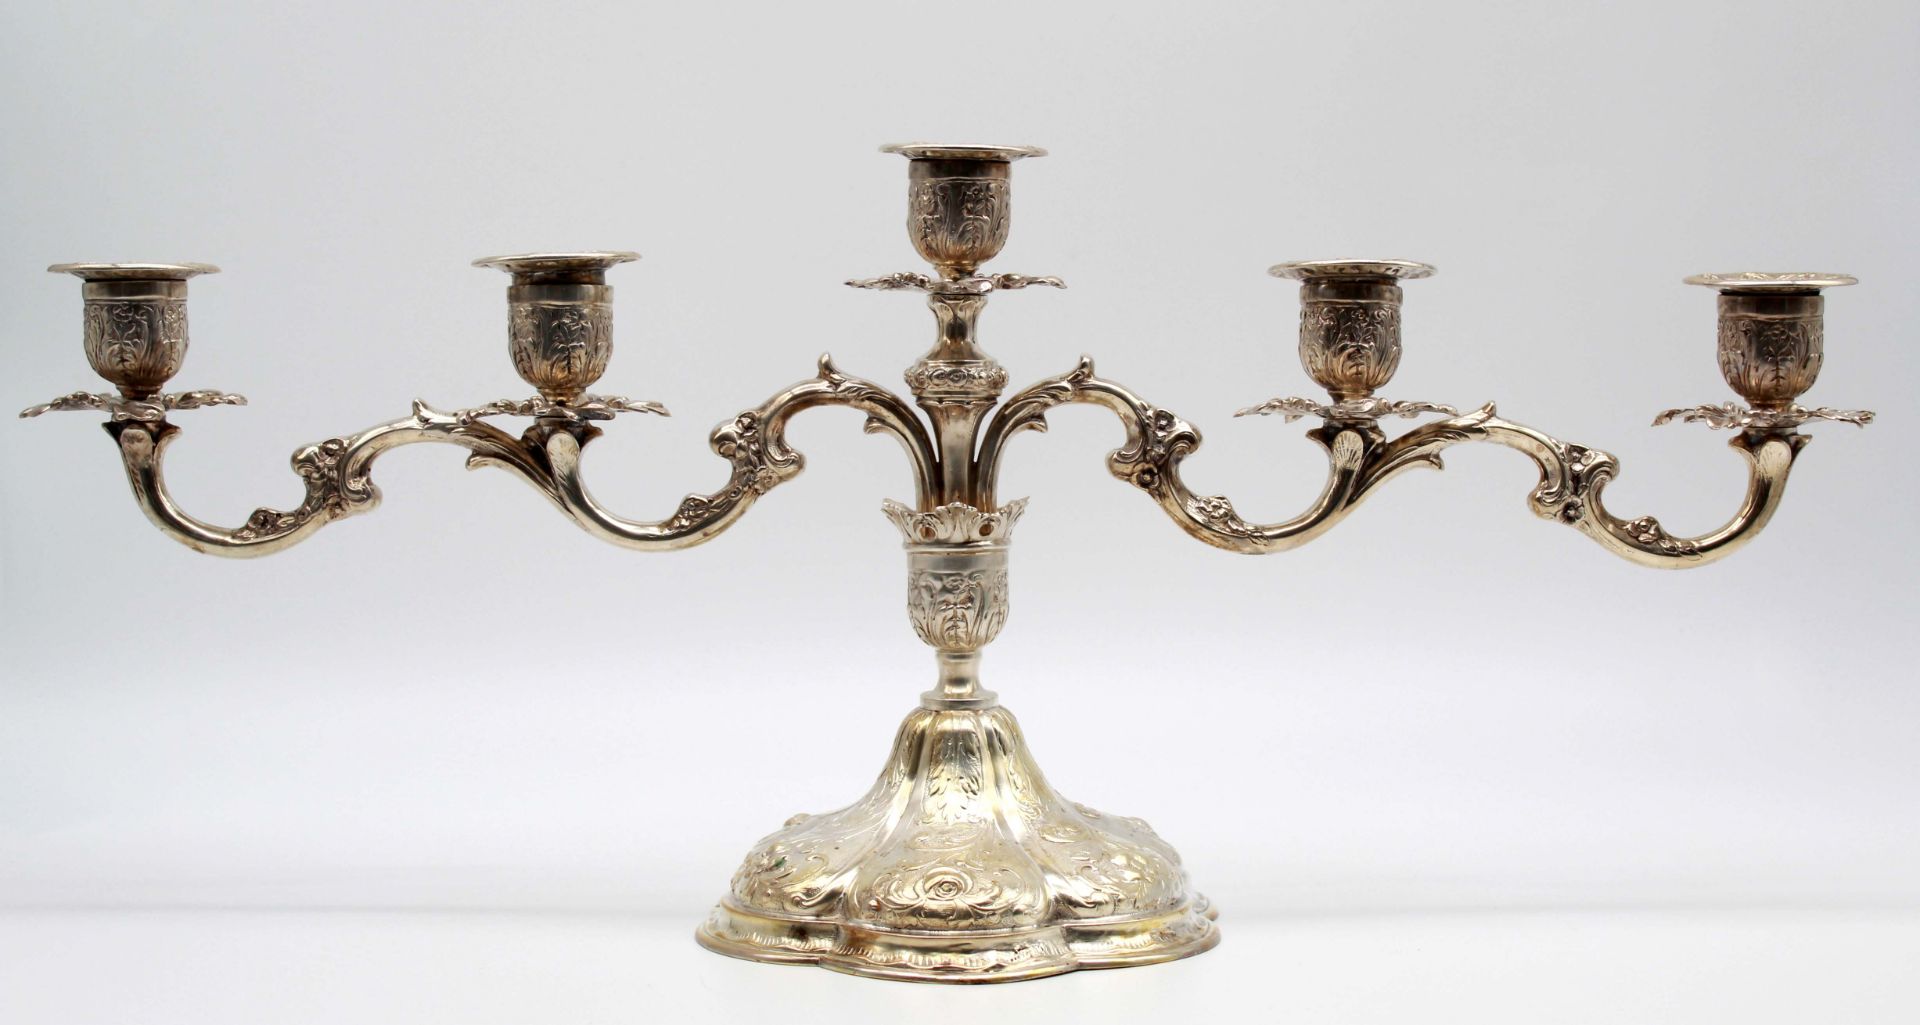 Candlestick, silver 800. 5 flames. Hallmarks. - Image 9 of 15